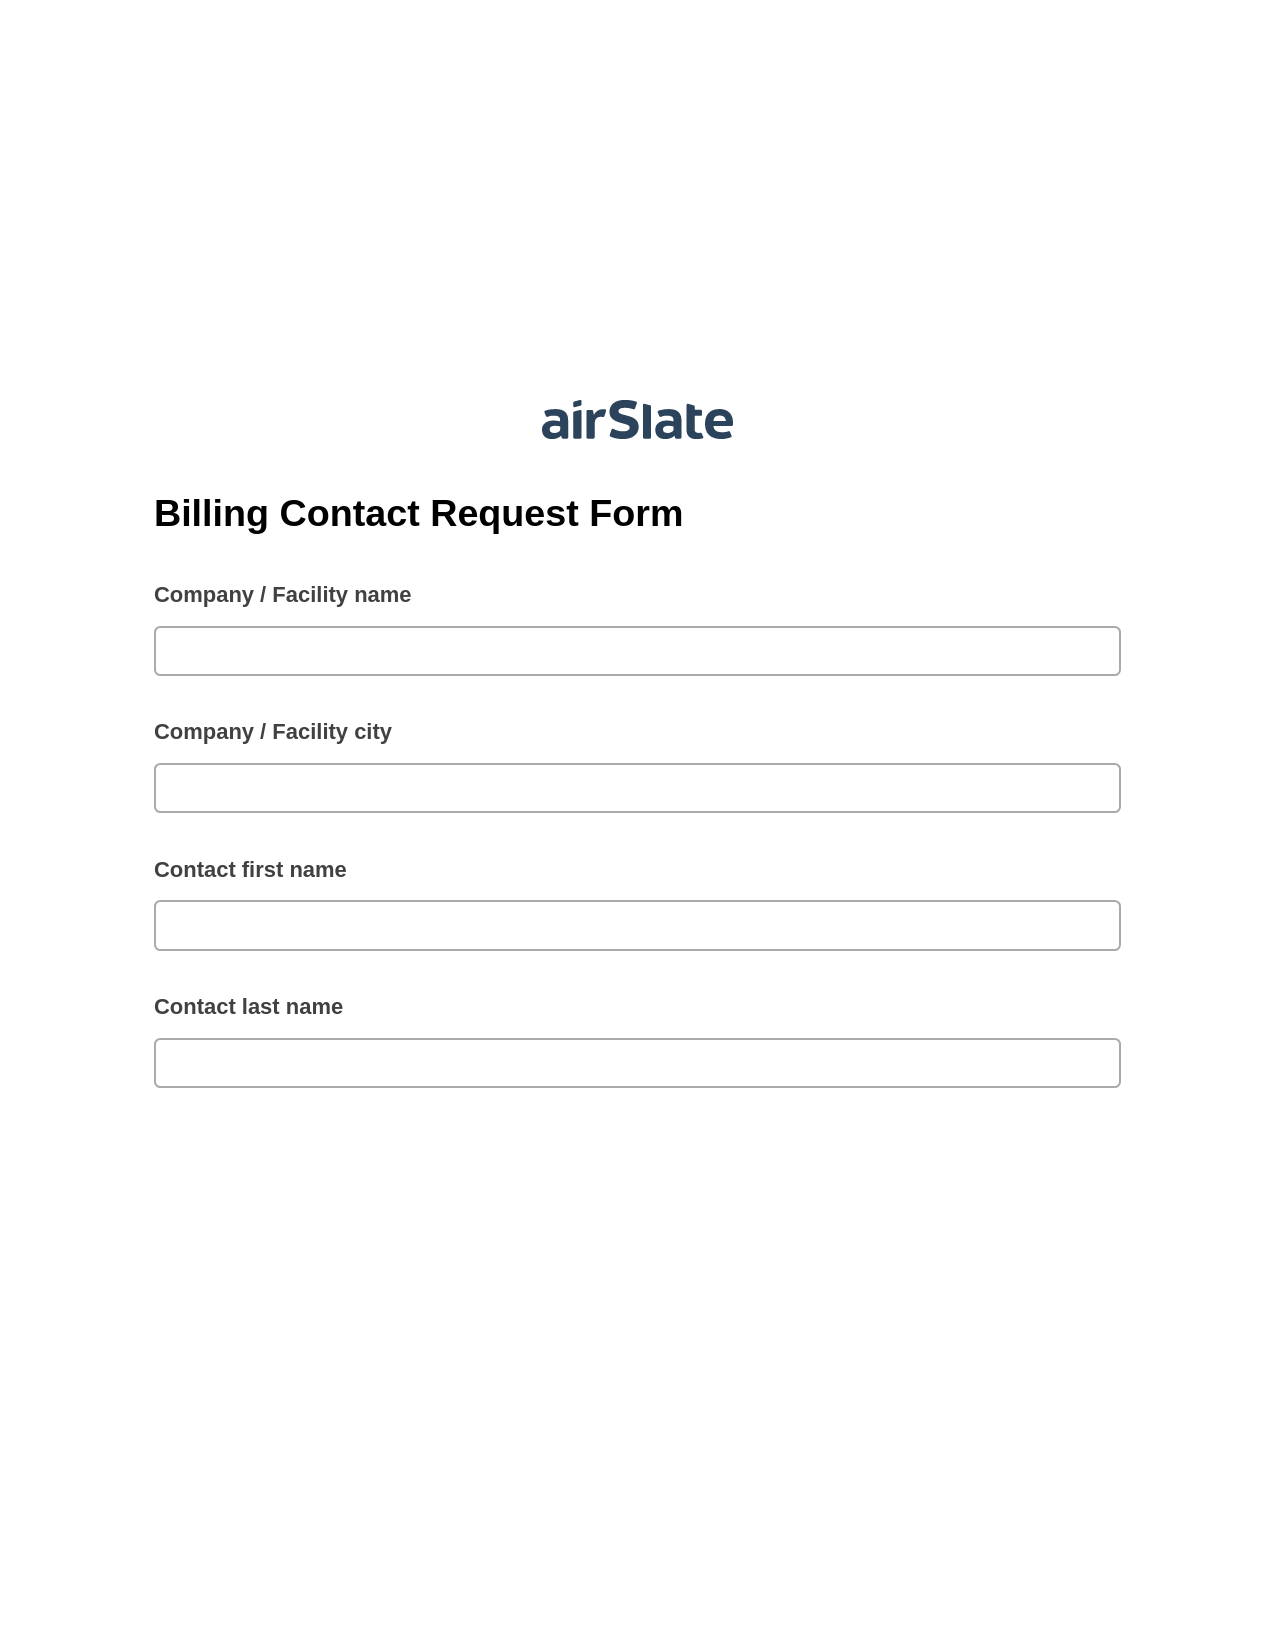 Multirole Billing Contact Request Form Pre-fill from another Slate Bot, Update MS Dynamics 365 Records Bot, Export to MySQL Bot